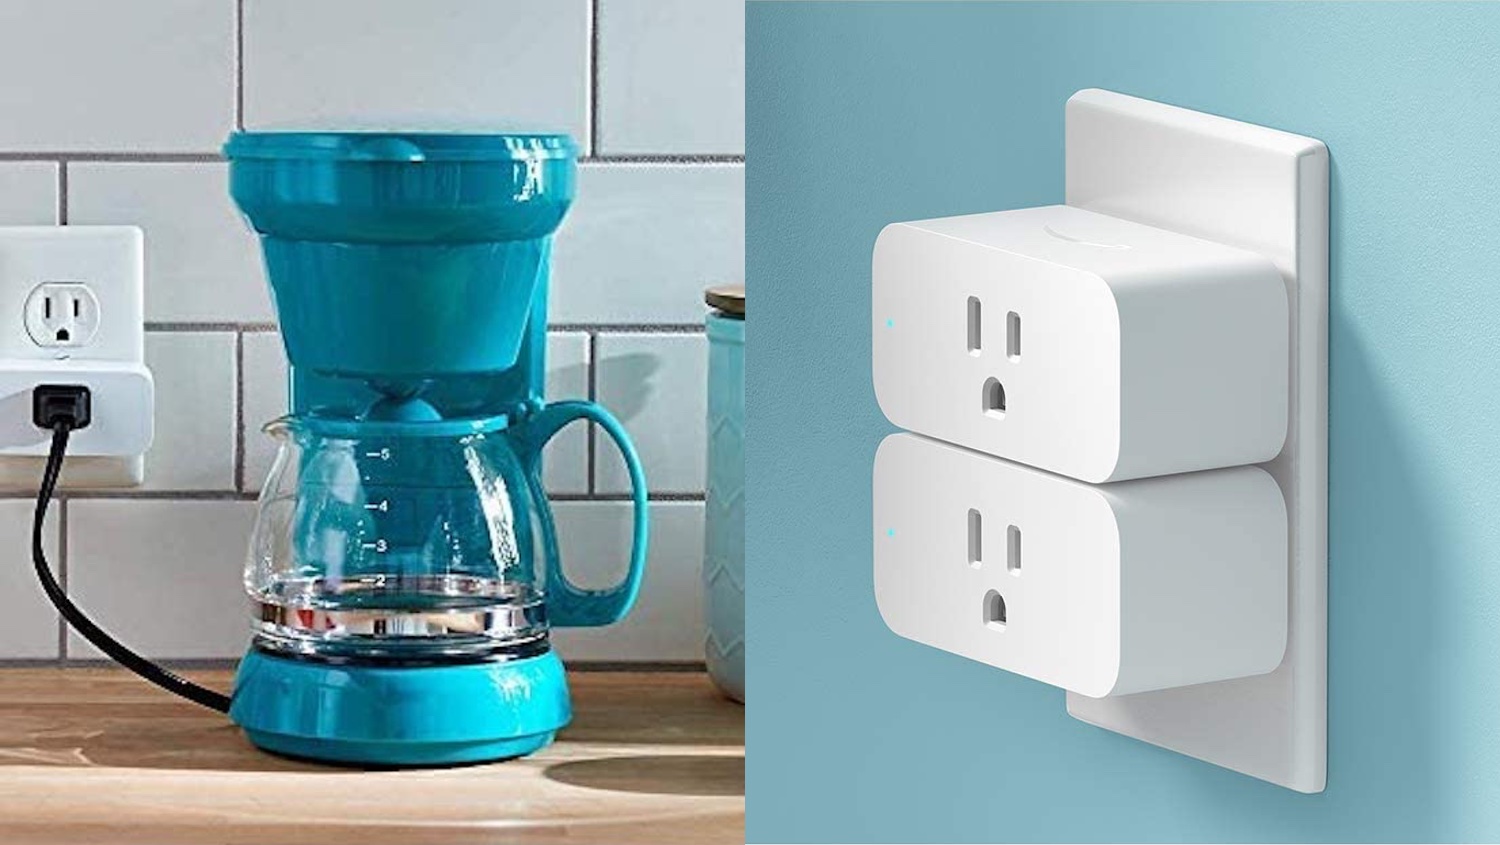 Alexa smart plugs in outlet, with coffee maker